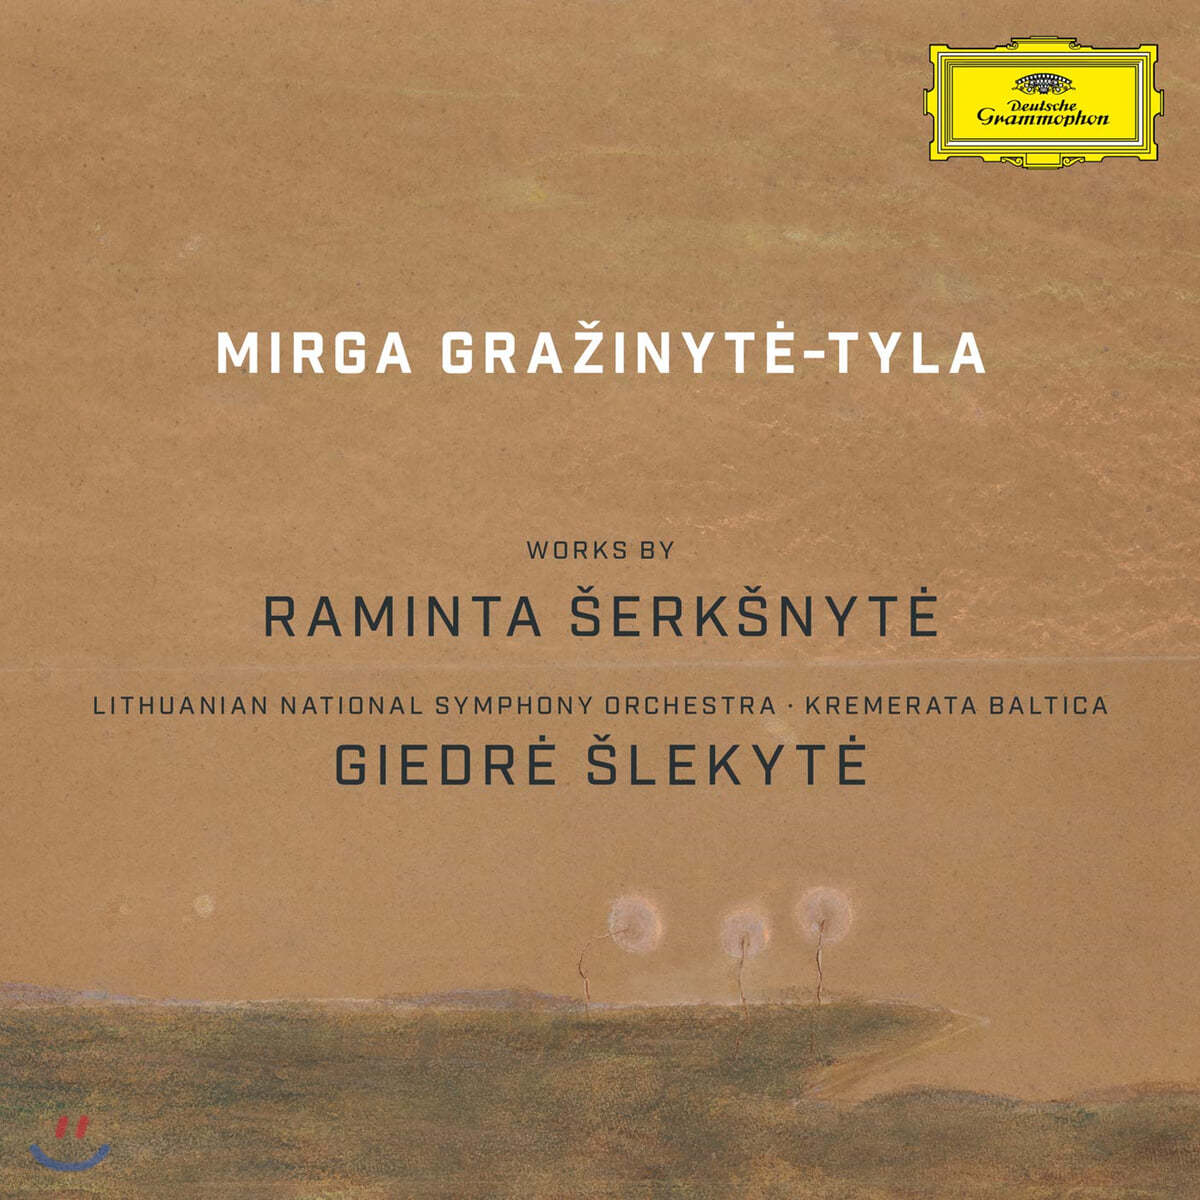 Giedre Slekyte 라민타 셰르크시니테 작품집 (Raminta Serksnyte - Going For The Impossible)